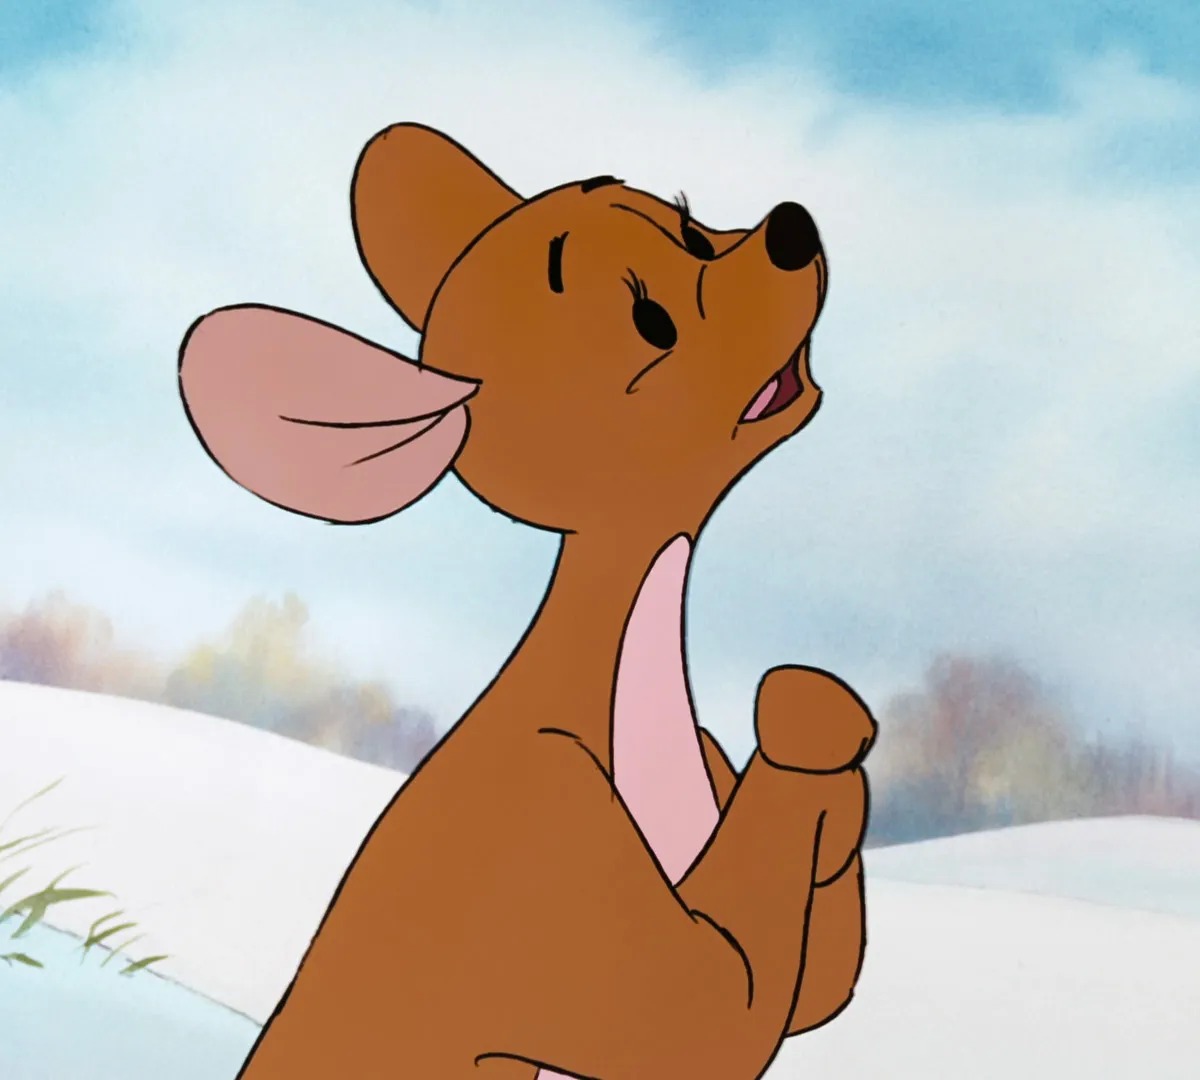 23-facts-about-kanga-the-new-adventures-of-winnie-the-pooh